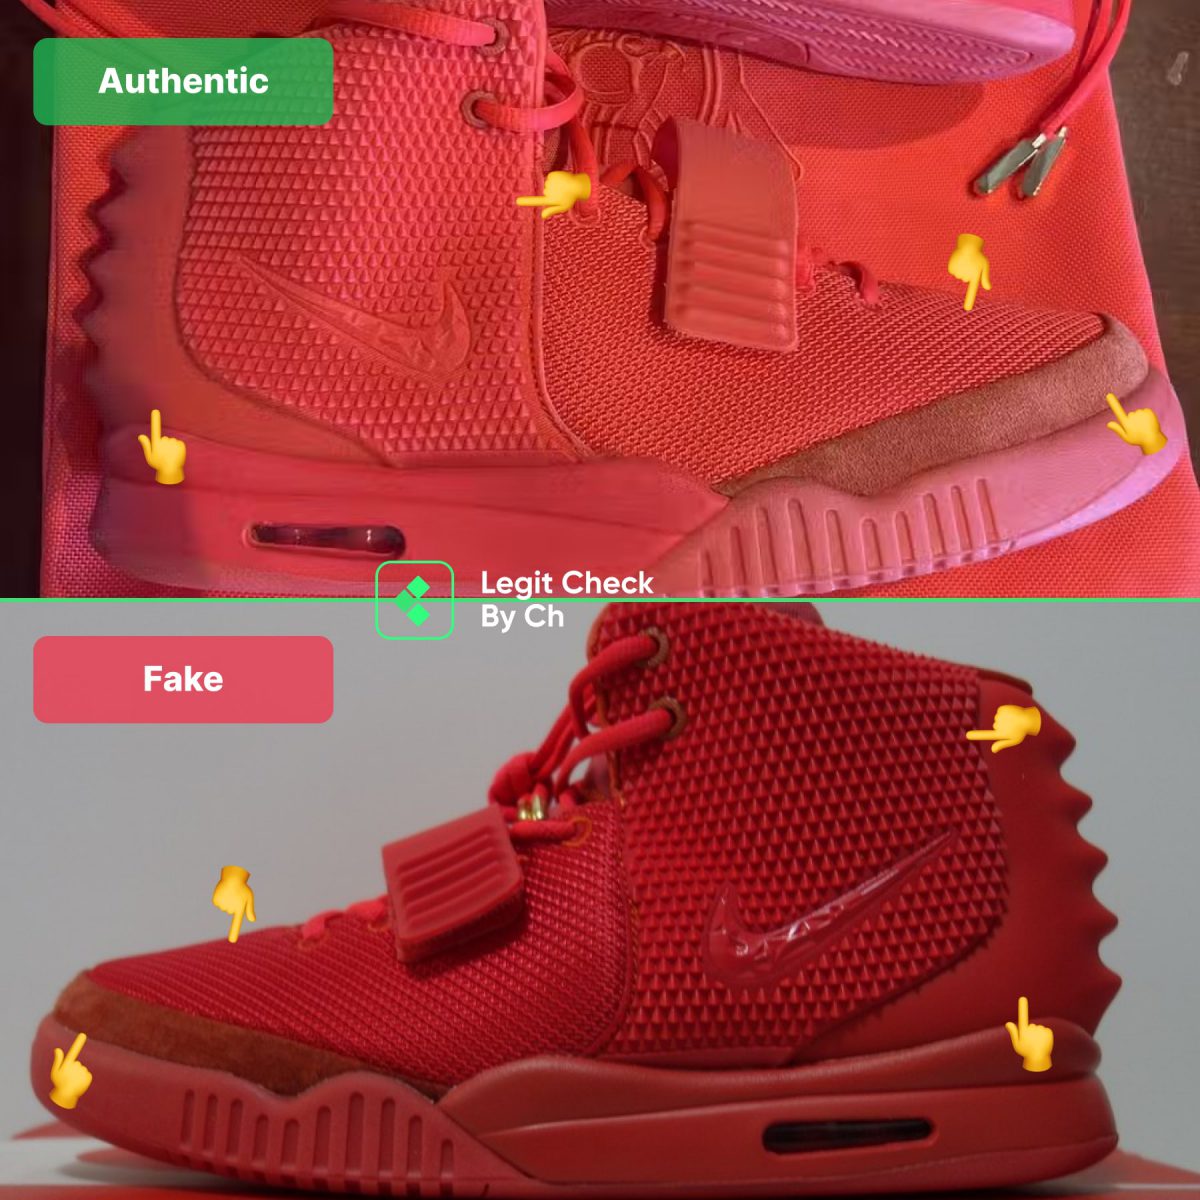 Authentic vs fake Yeezy Red October Comparison: Color